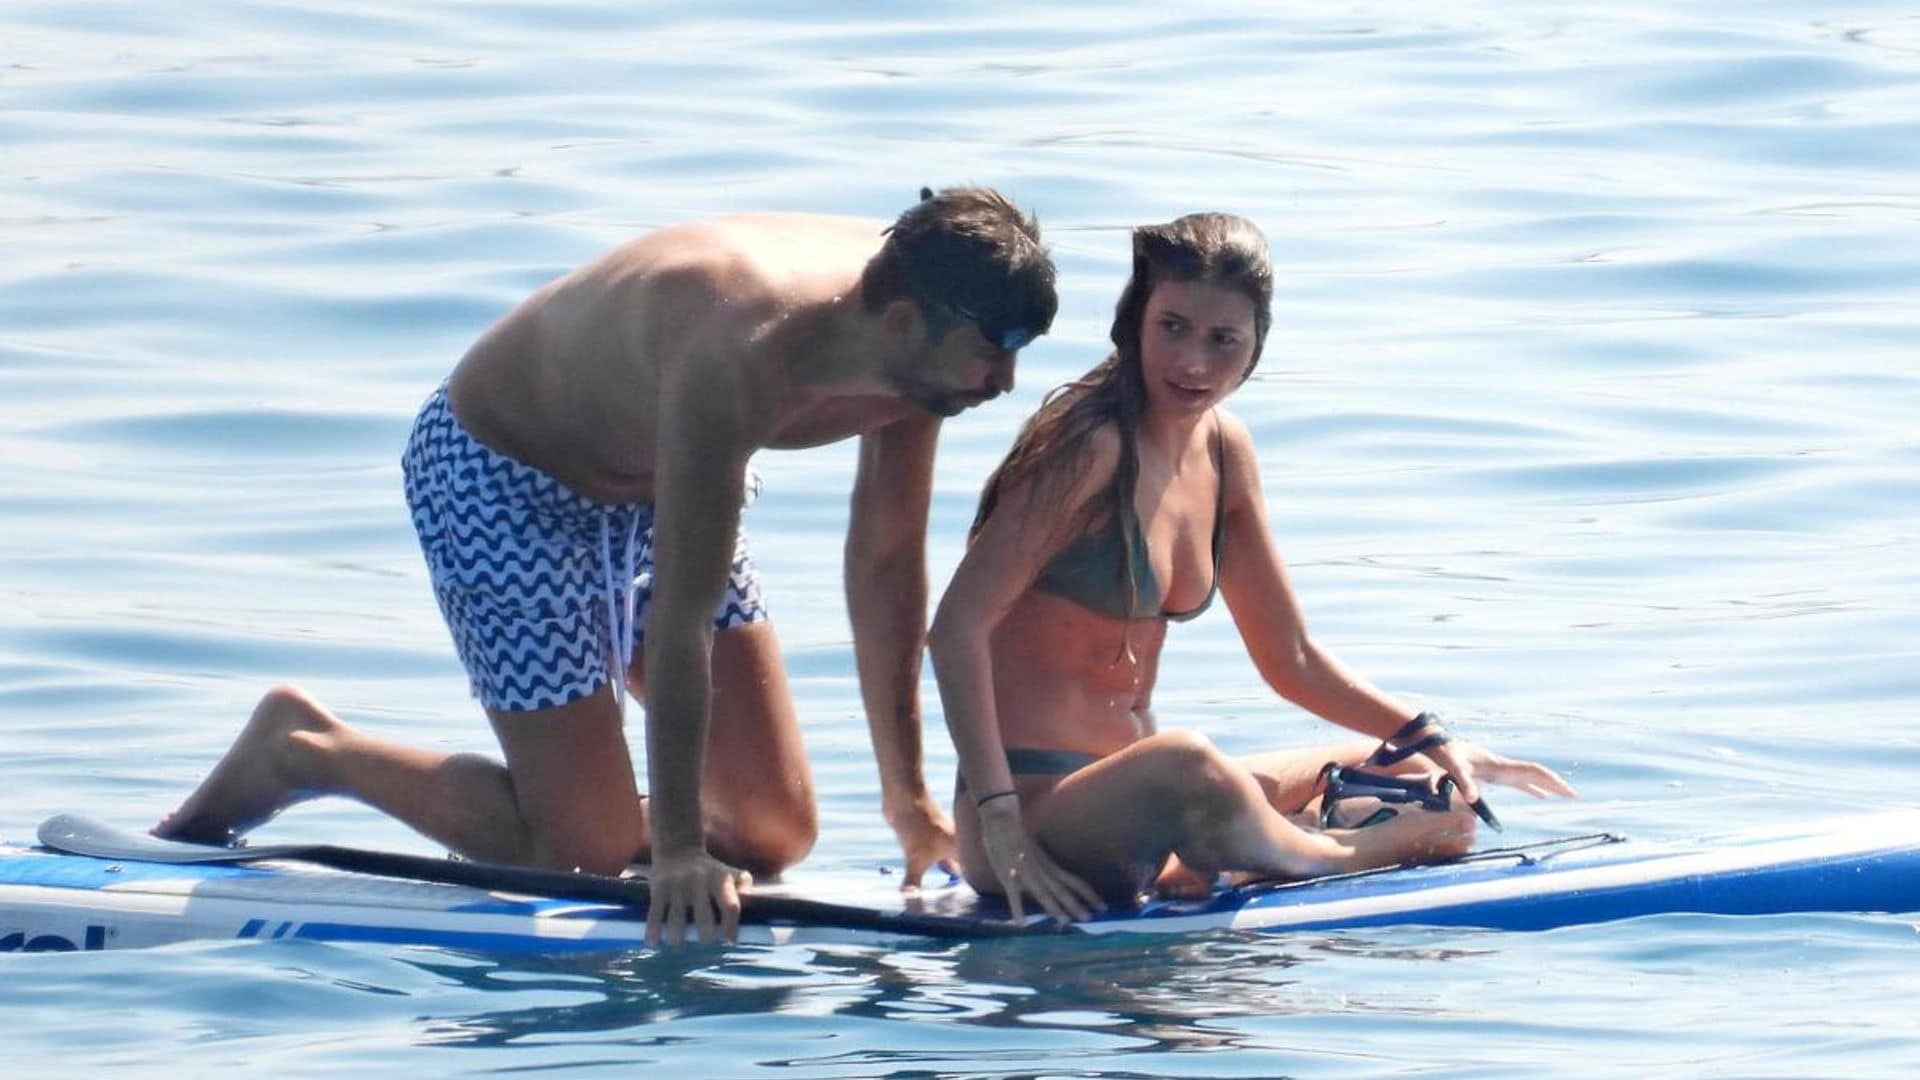 Pique and Clara Chía enjoy romantic swim in the ocean and relax on luxury yacht